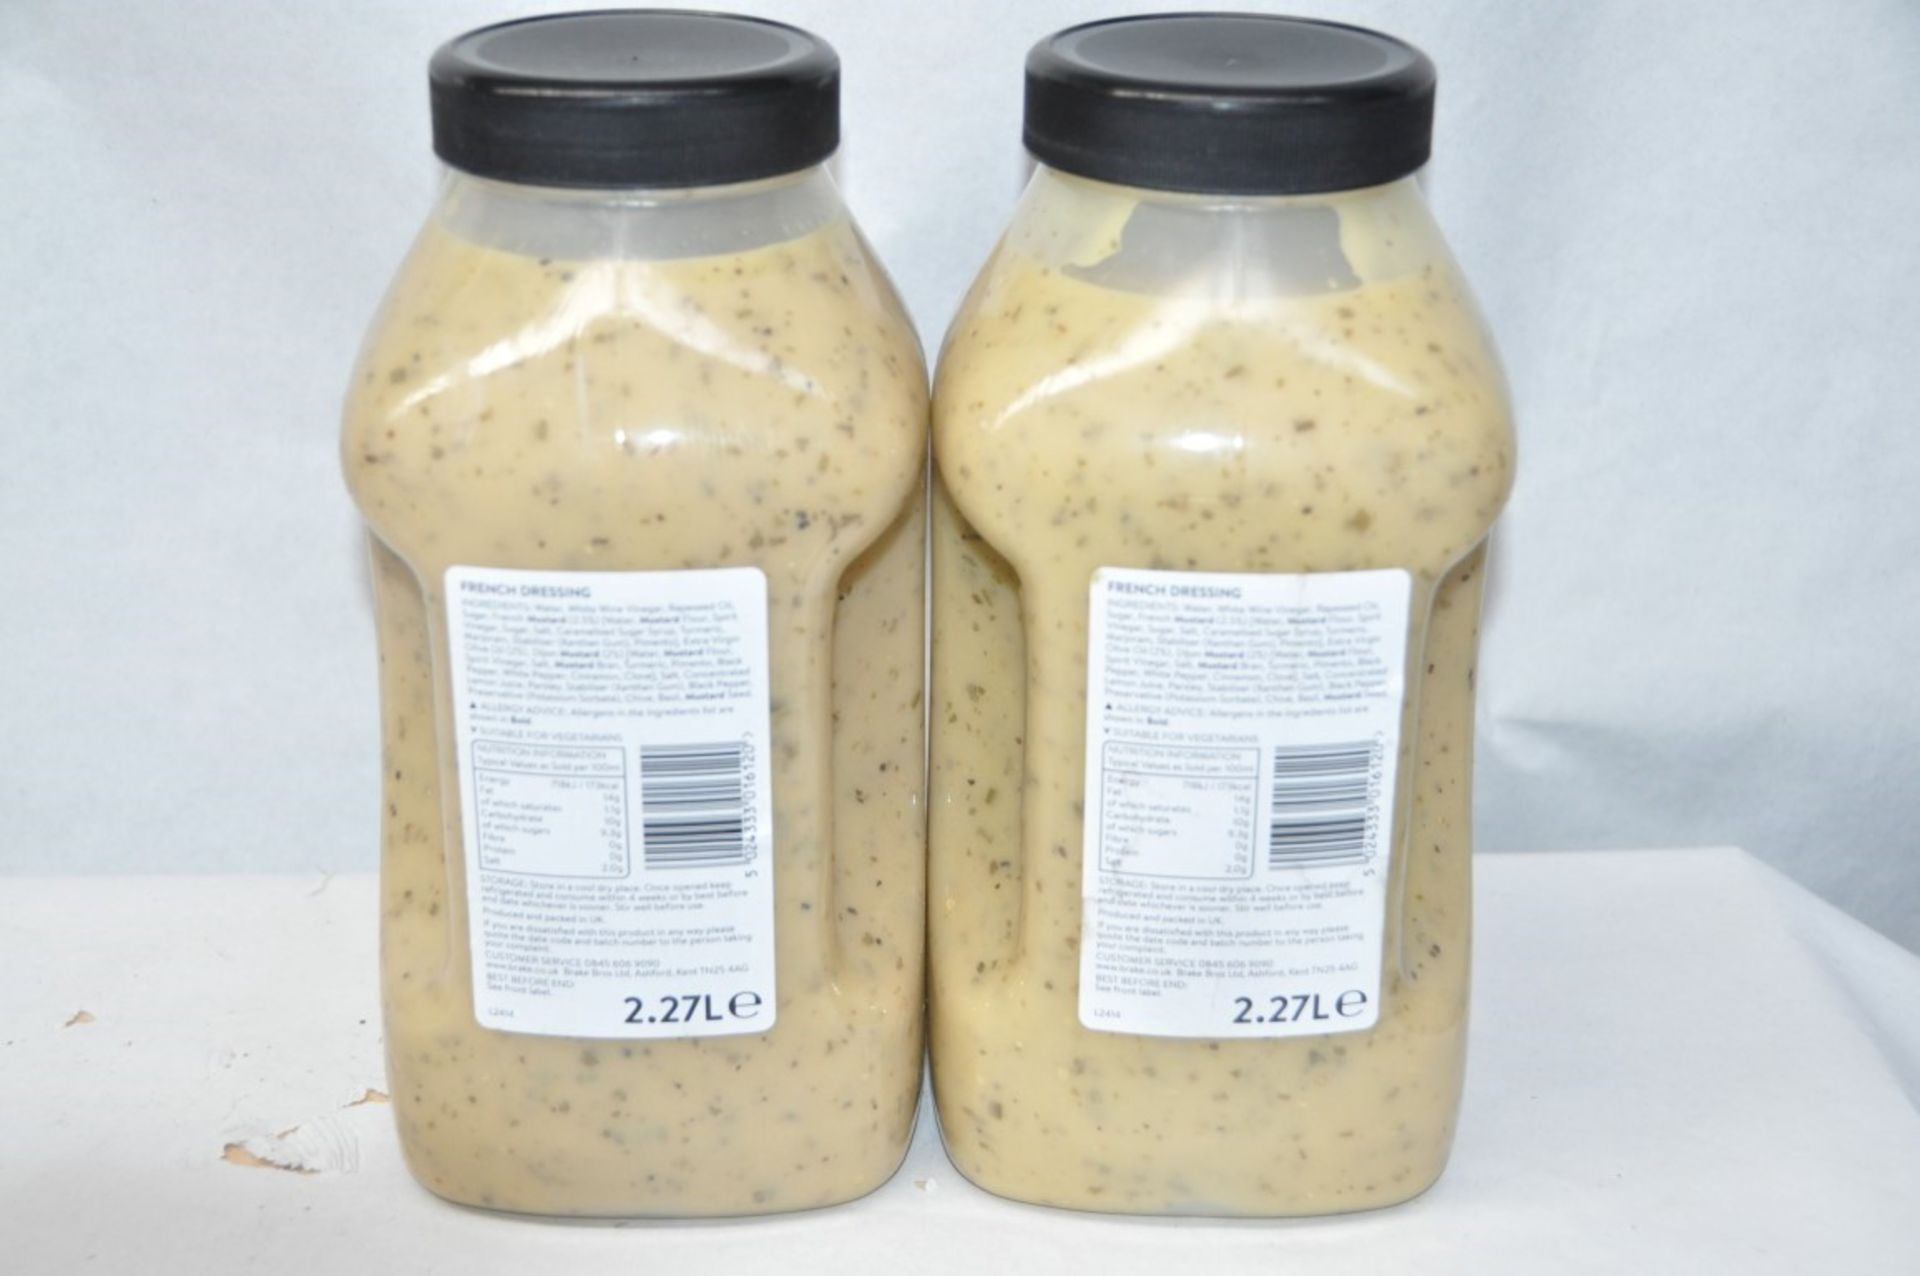 2 x Catering Tubs of "Brakes" French Dressing - 2.27 Litres Each - Best Before Nov 2015 - Unused - Image 2 of 2